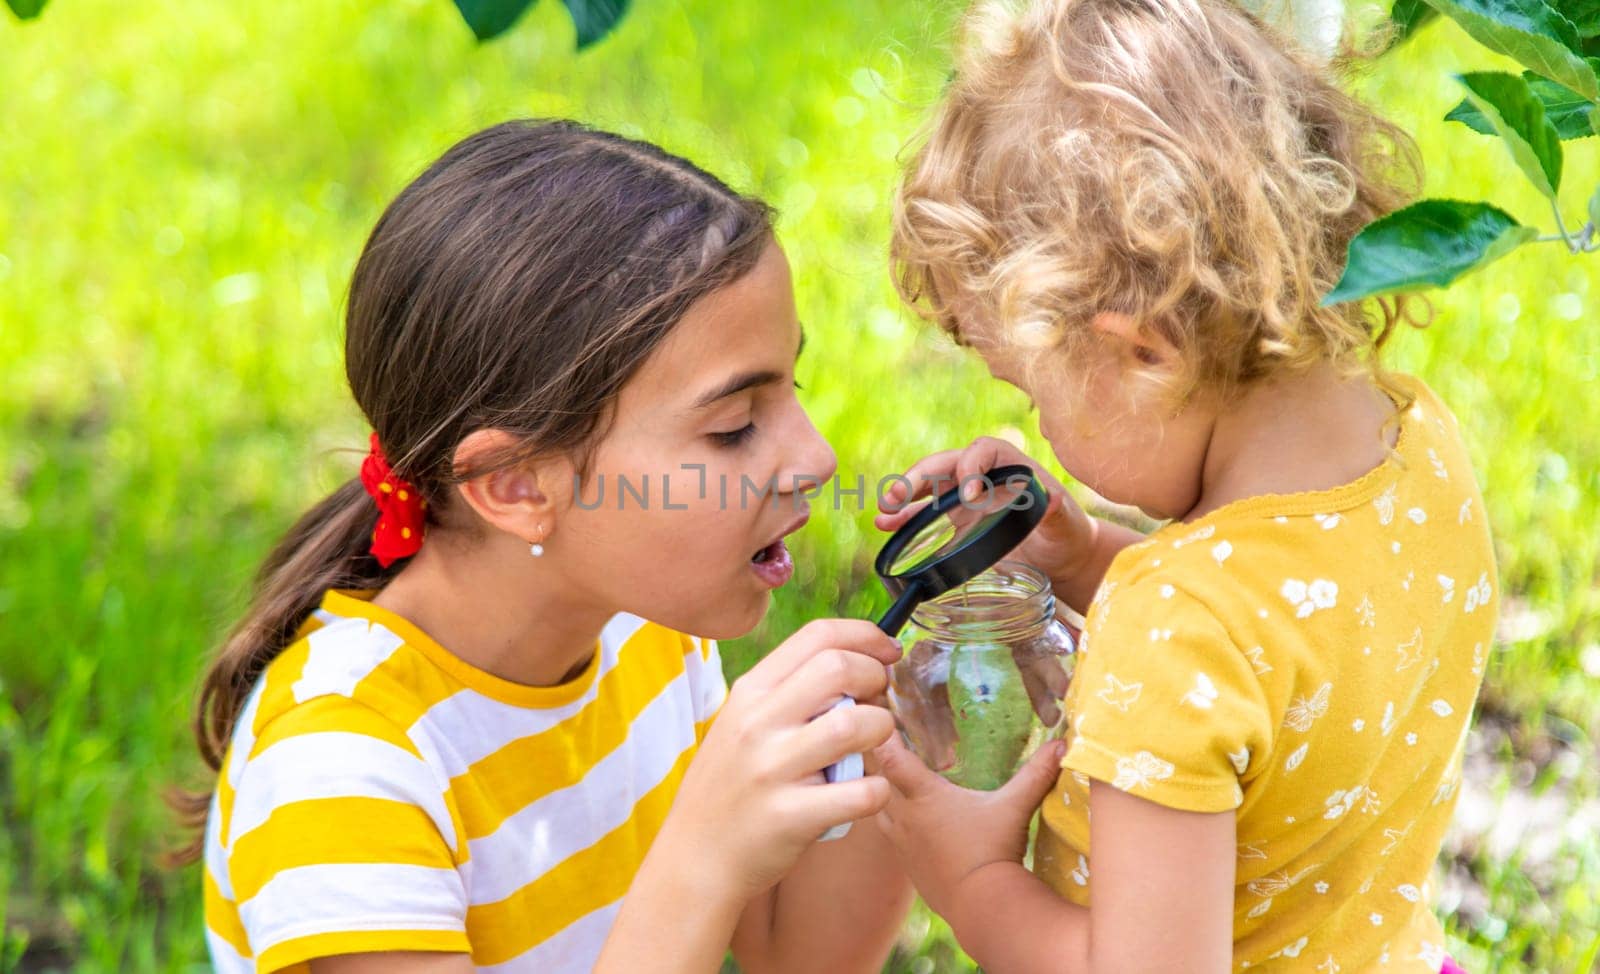 A child studies a beetle in a jar with a magnifying glass. Selective focus. Nature.